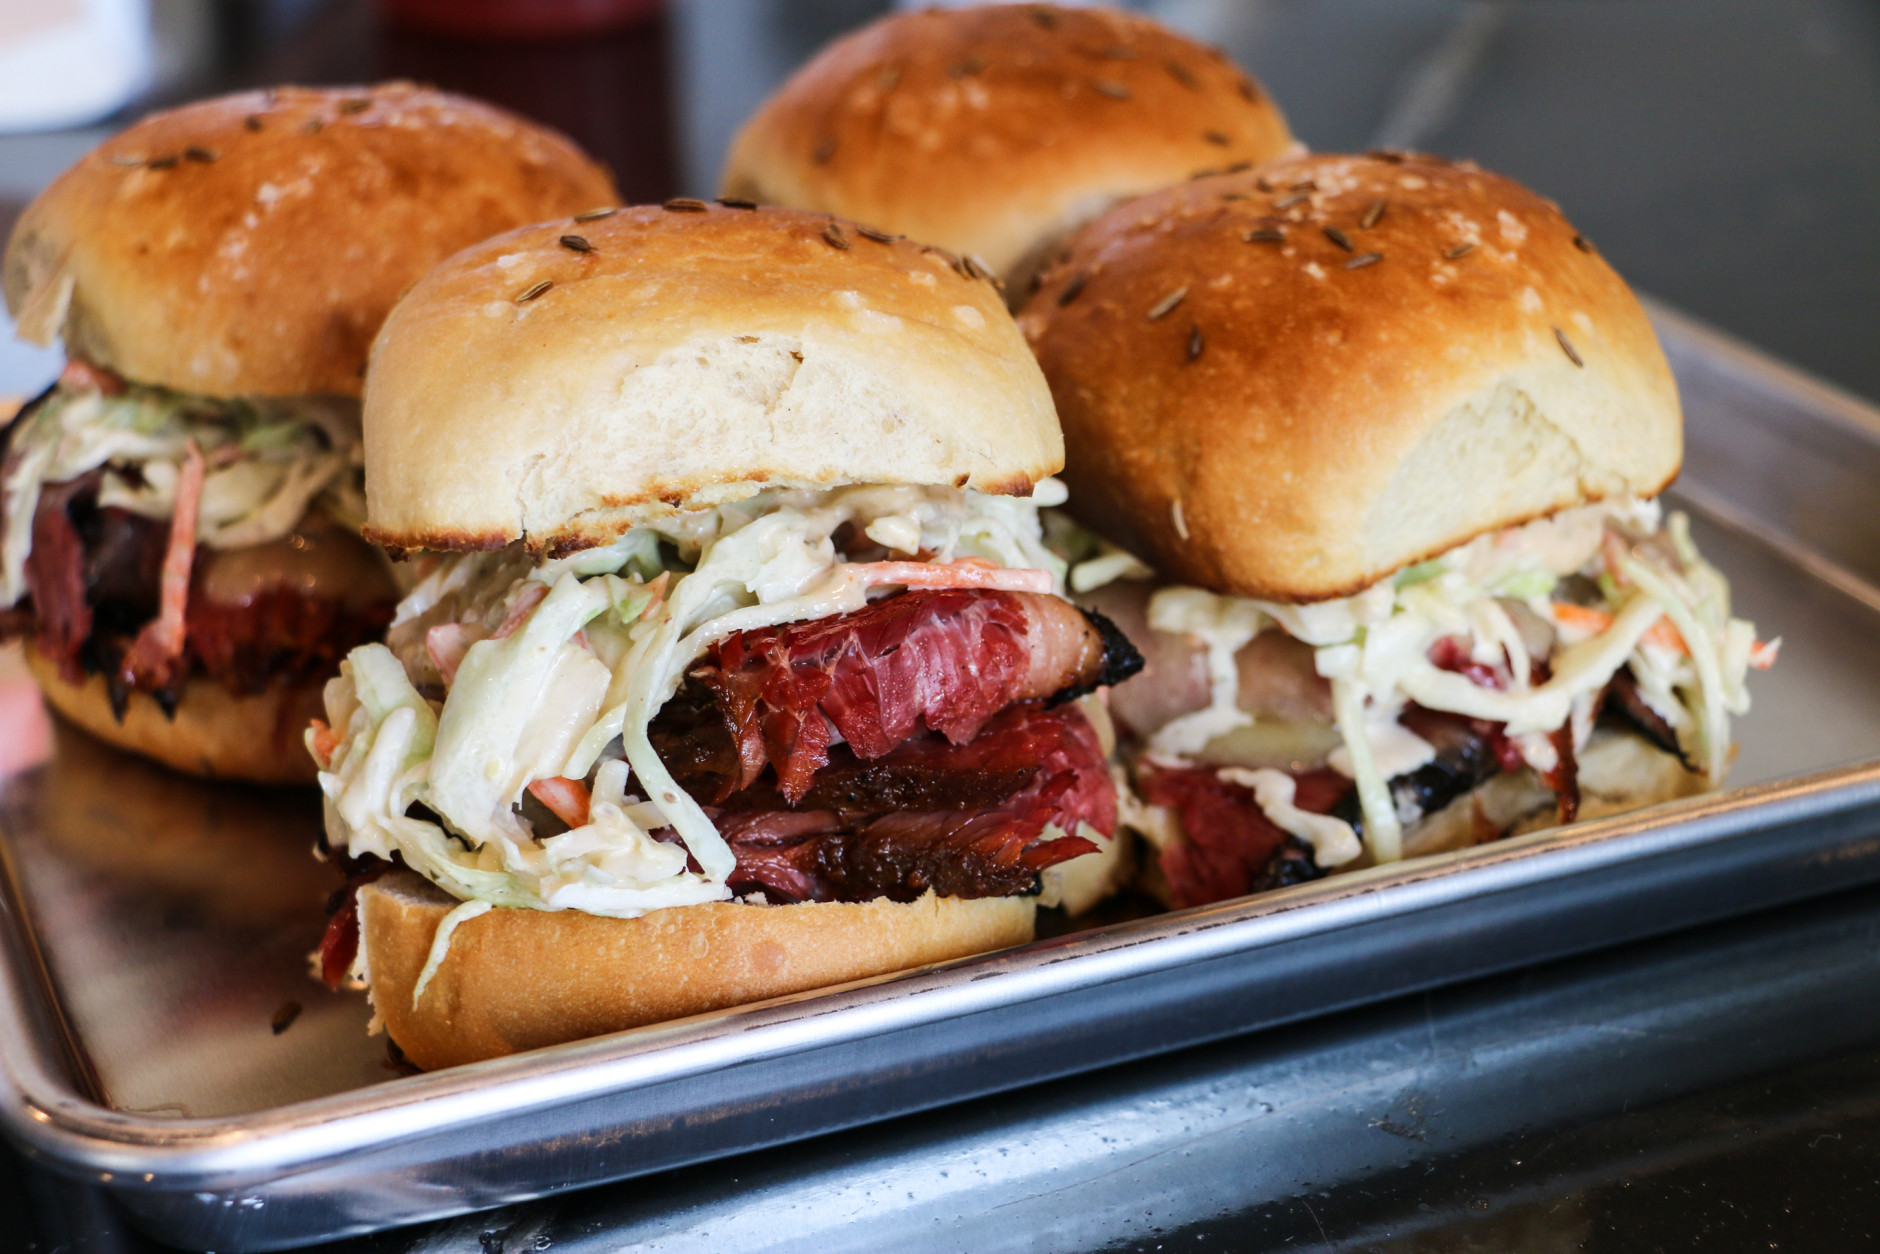 The focus at Smoked & Stacked, a new fast-casual restaurant from "Top Chef" finalist Marjorie Meek-Bradley, is pastrami and milk bread. (Courtesy Smoked & Stacked)  